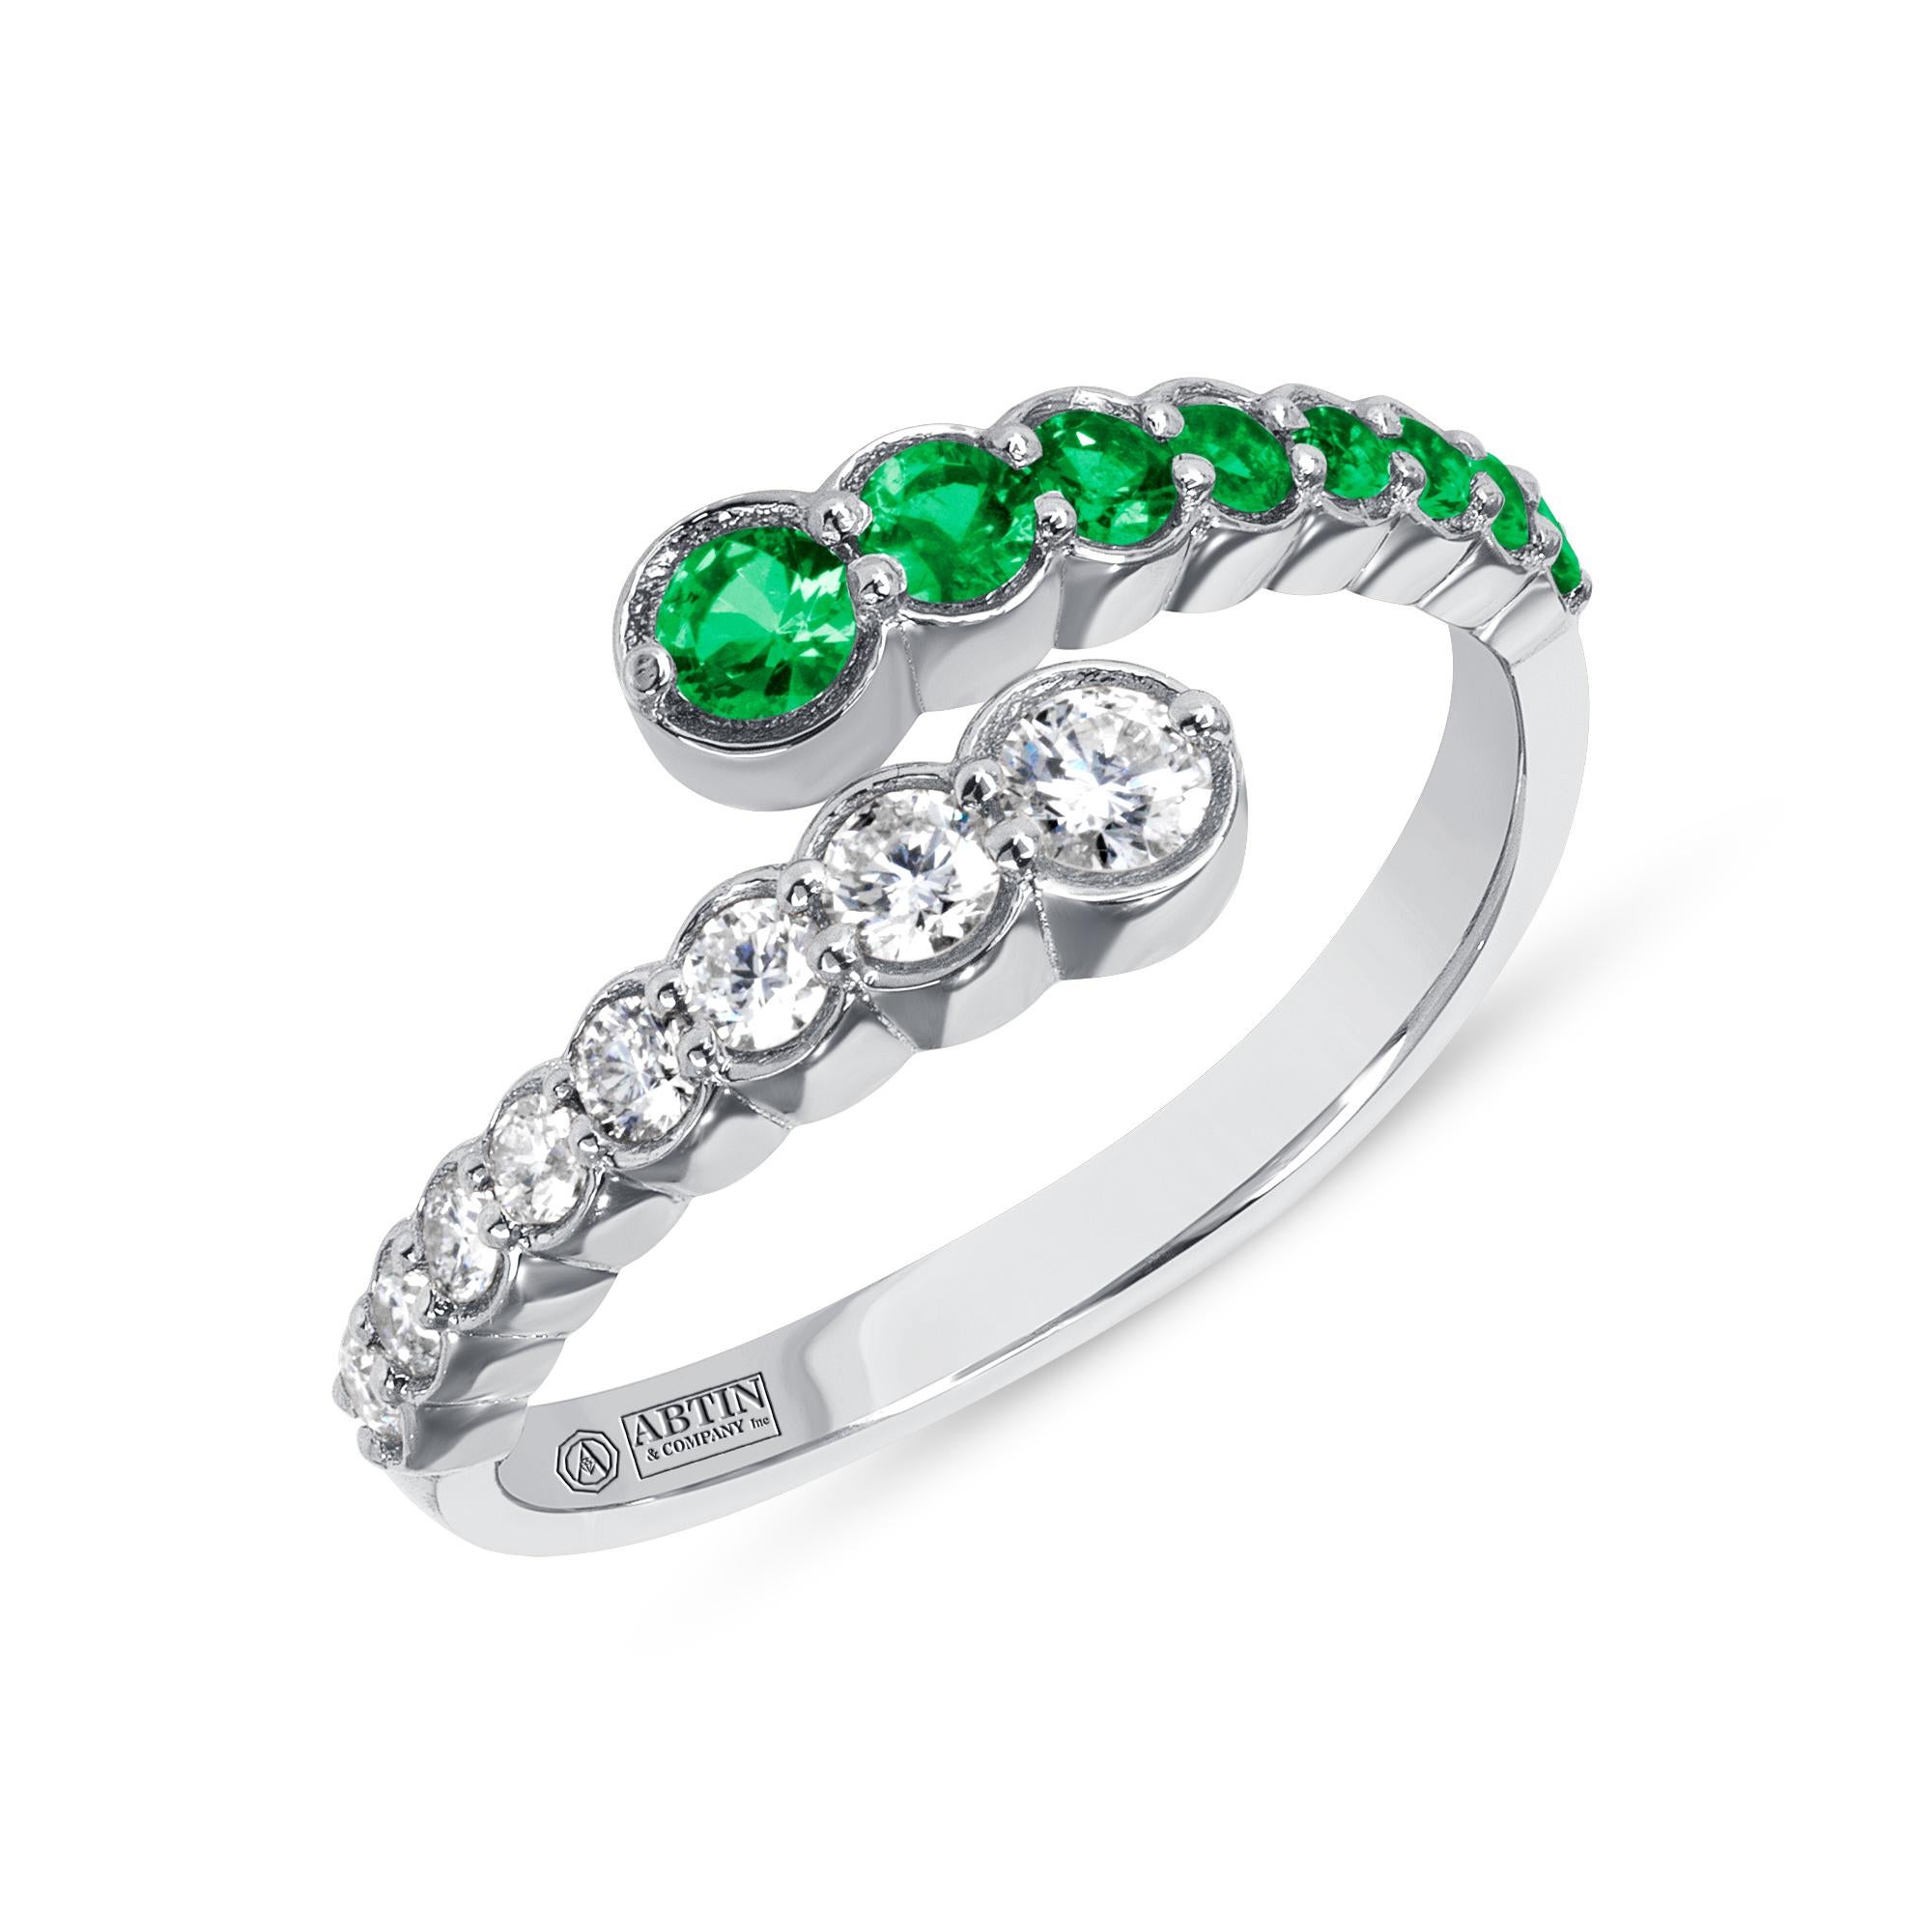 Crafted in 14K gold this ring features clean and contemporary lines. This modern and stylish open bypass ring is set with mesmerizing round-cut 
diamonds and genuine emeralds. Stack it with your stacking rings or wear it solo to elevate any